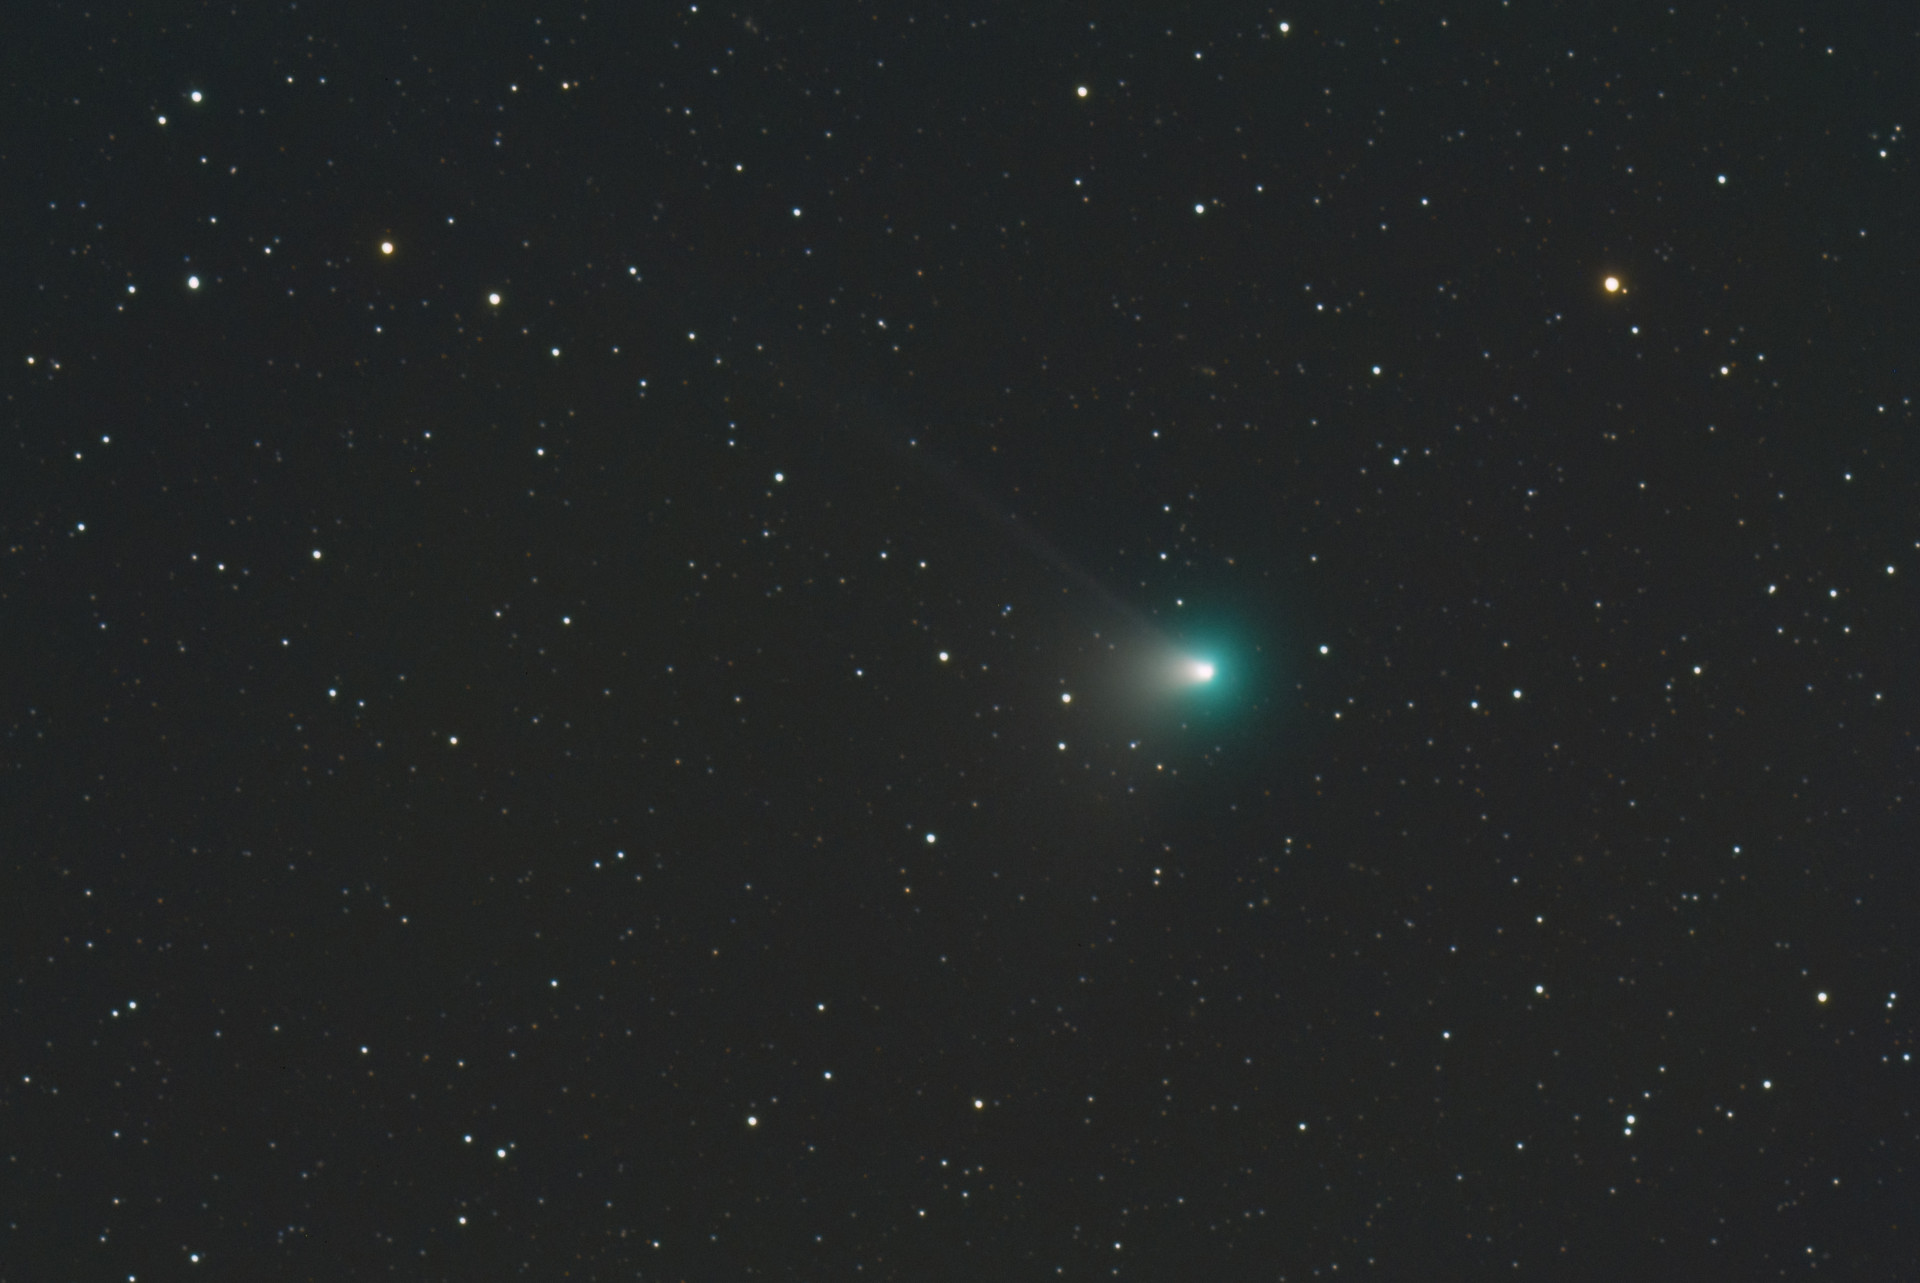 This is your only chance to see a rare green comet for the next 400 years